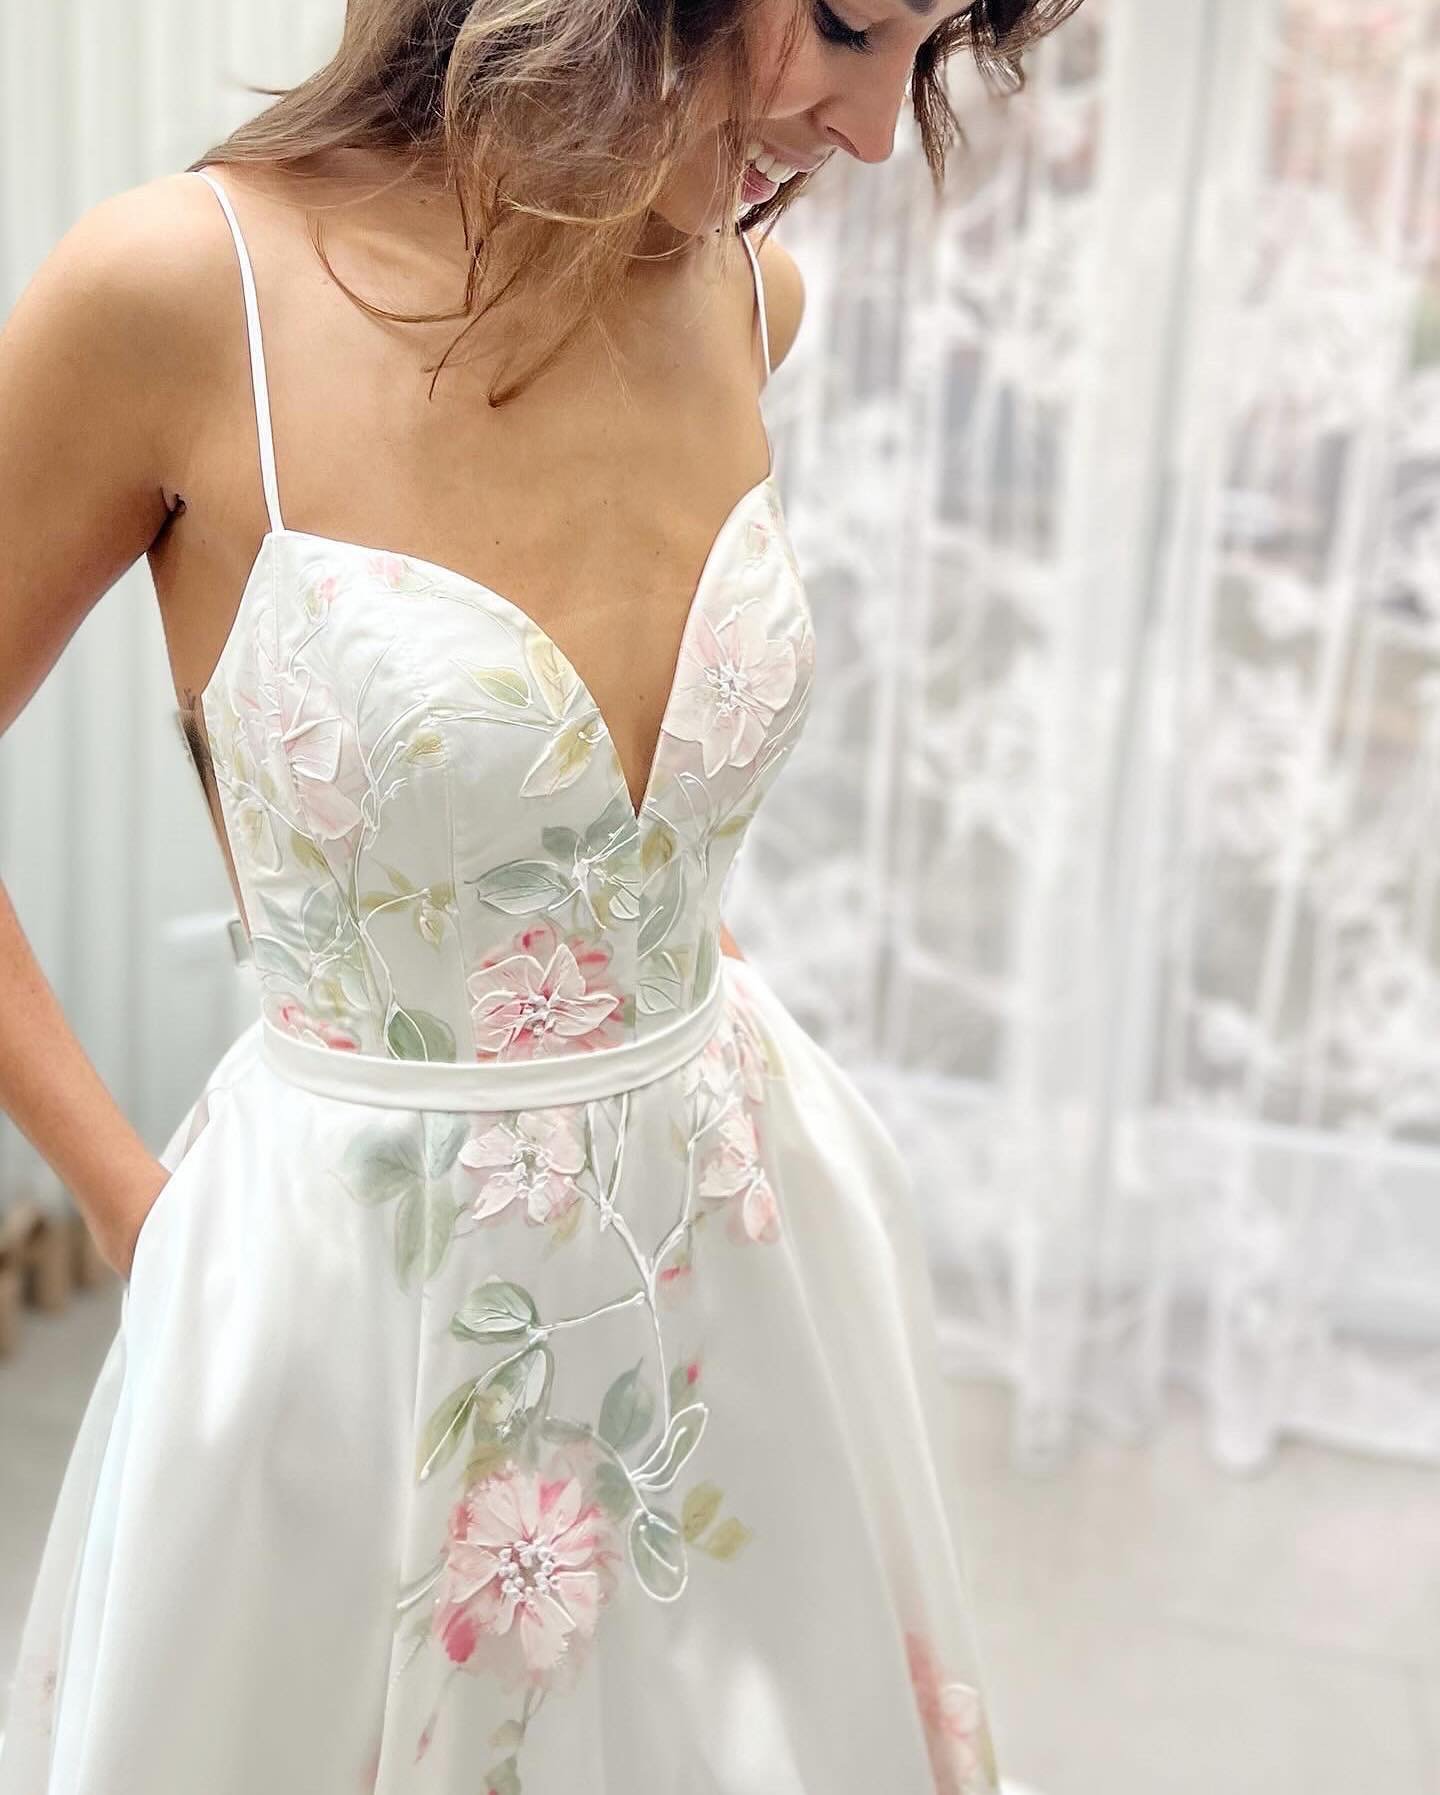 A L I N A 🌸

New from @houseofsavin 

Beautifully feminine and wonderfully unique with her hand painted florals whilst resonating everything &lsquo;bridal&rsquo; in that sumptuous silk satin 🌸 

.⁣
.⁣
.⁣
.⁣
#dreamweddingdress #weddingdressshopping 